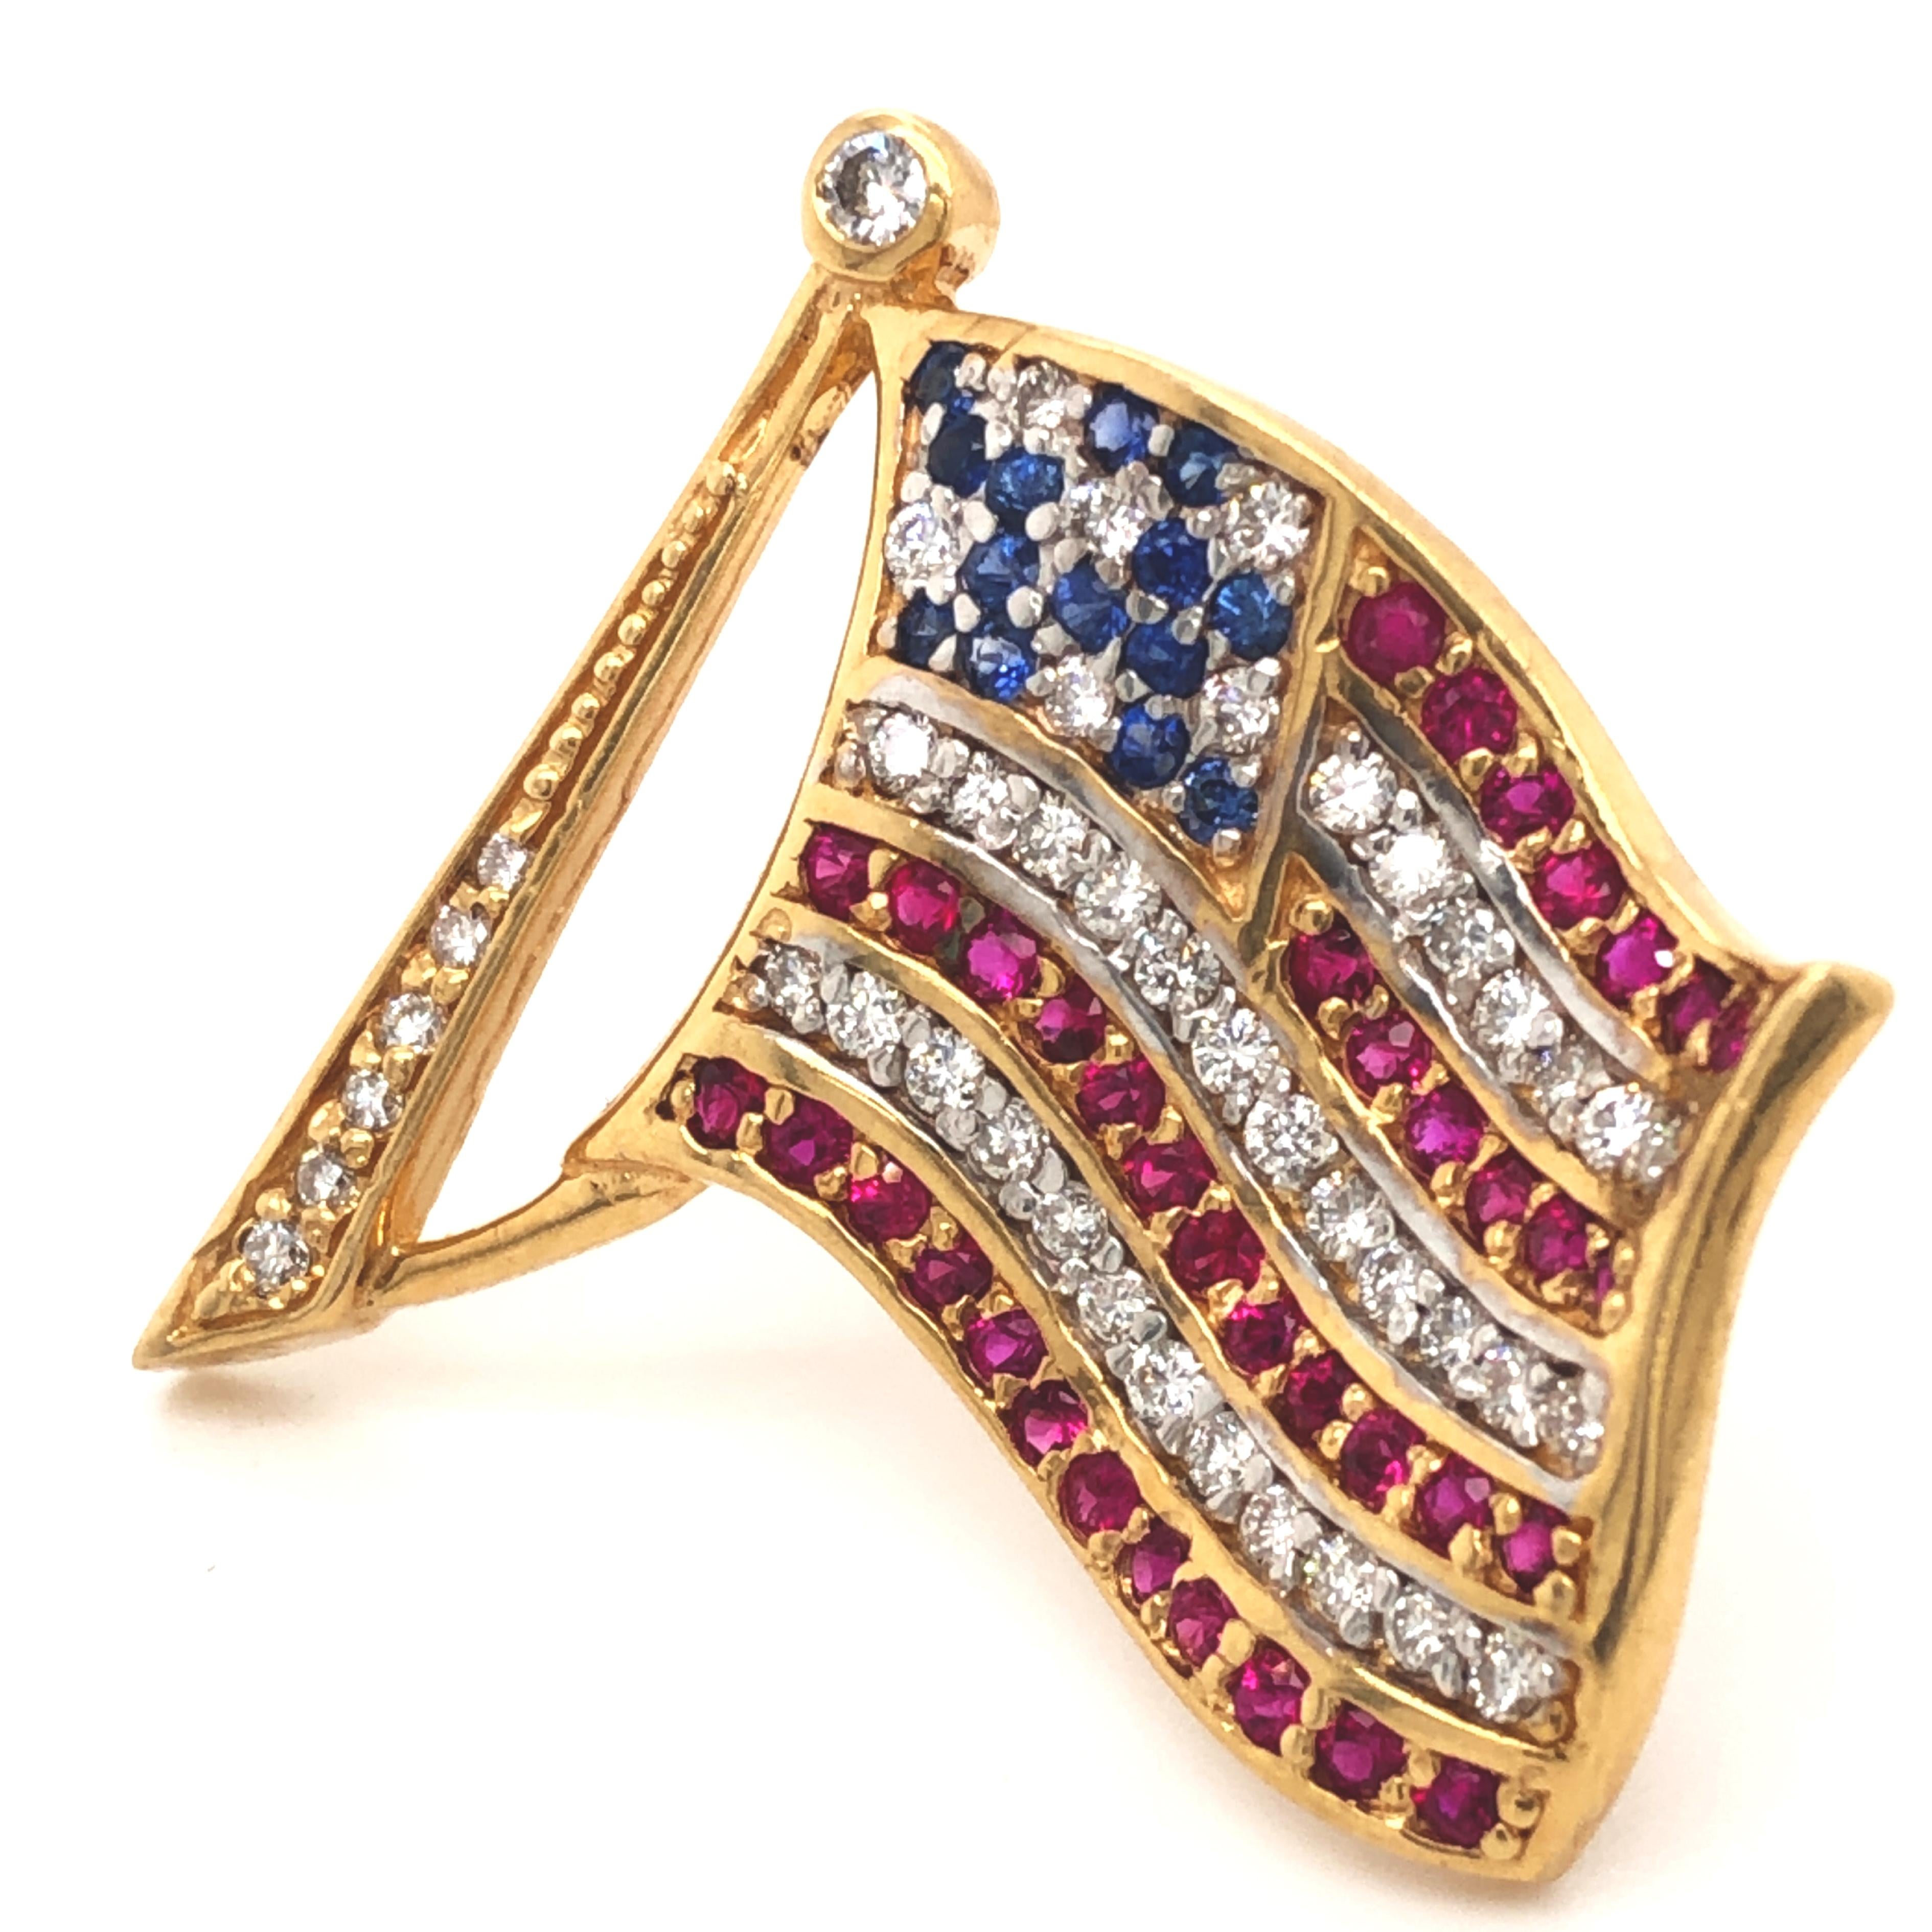 Original 1970 ruby, white diamond and sapphire American Flag 14K yellow Gold setting pin.
A patriotic, timeless classic, perfect with any attire in perfect conditions, as new.
This brooch is featuring 0.15kt, 14 natural blue sapphire, 0.65Kt, 38